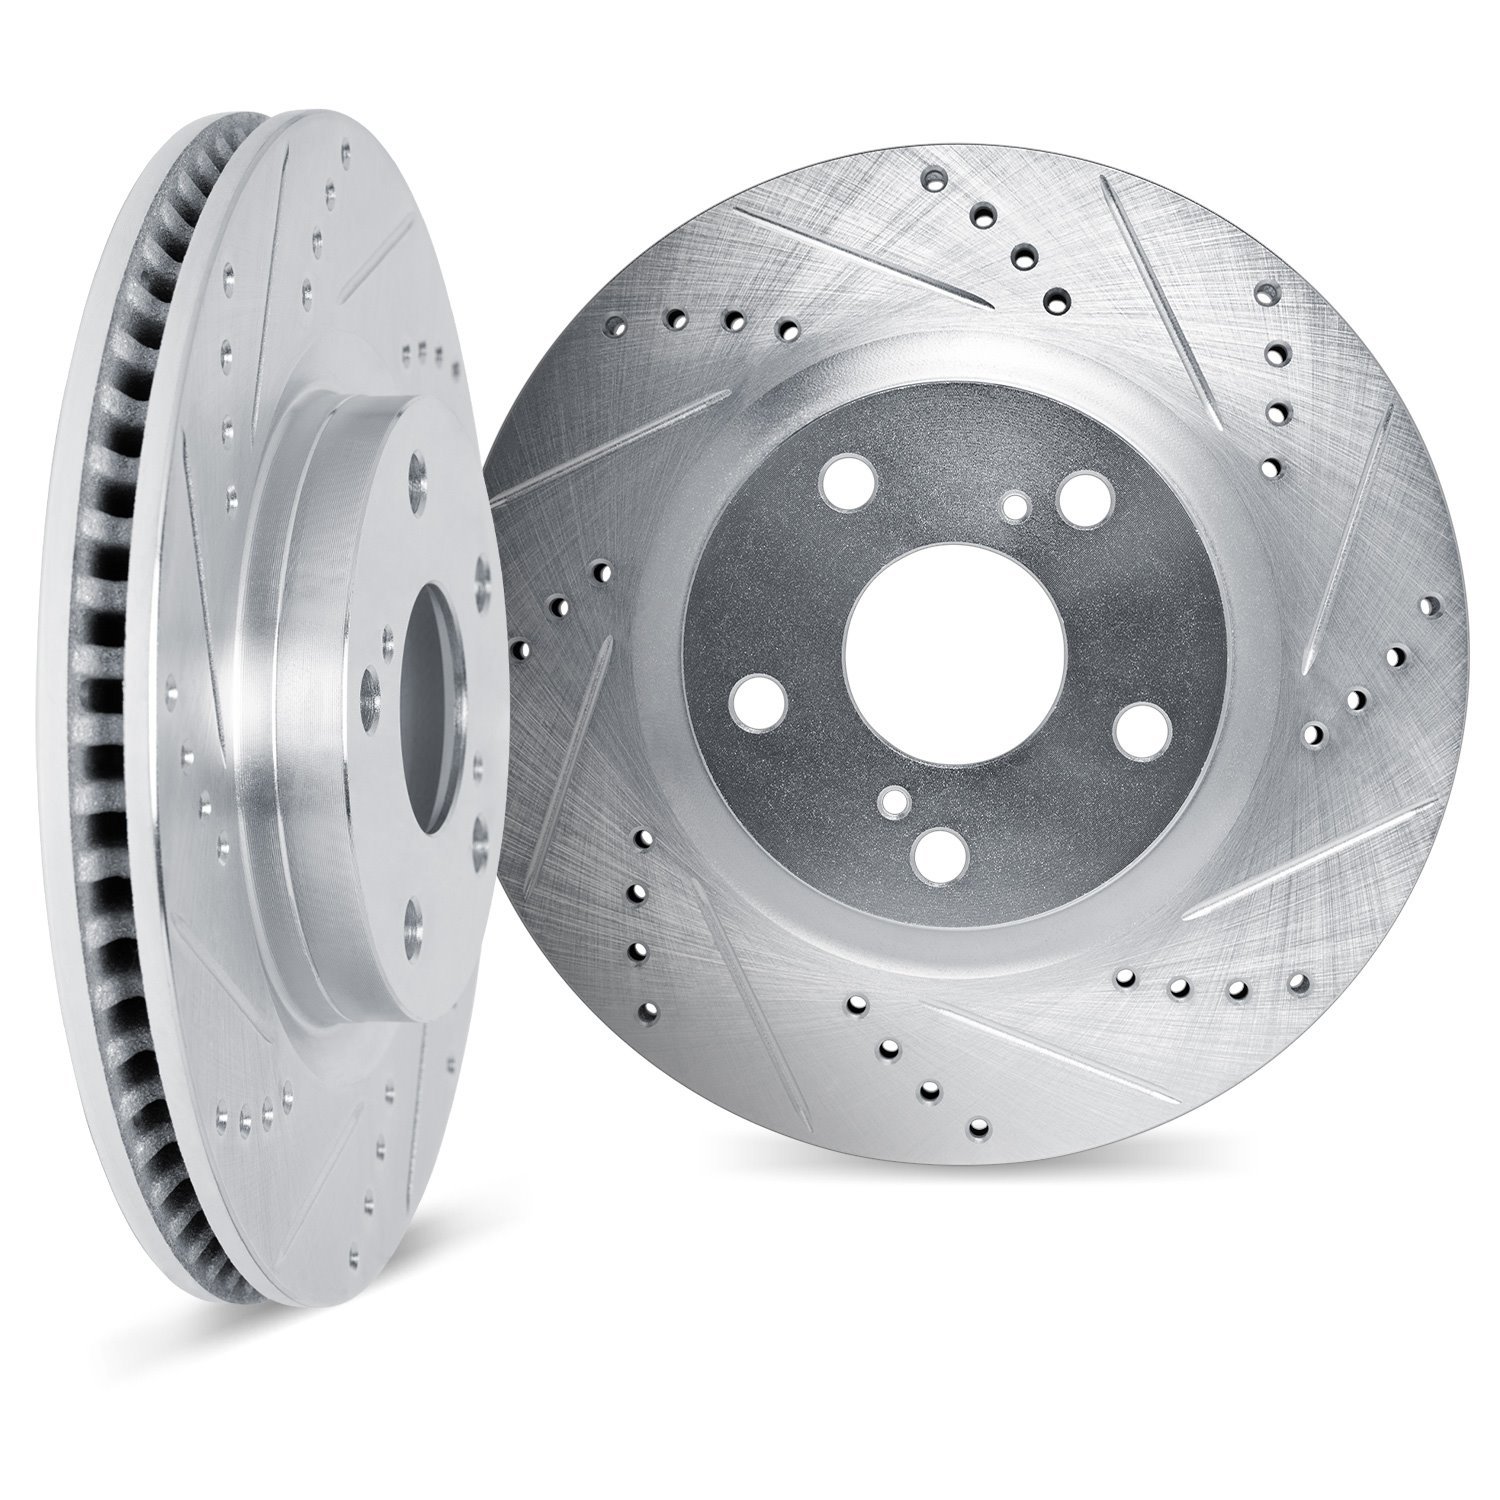 7002-47070 Drilled/Slotted Brake Rotors [Silver], Fits Select GM, Position: Rear